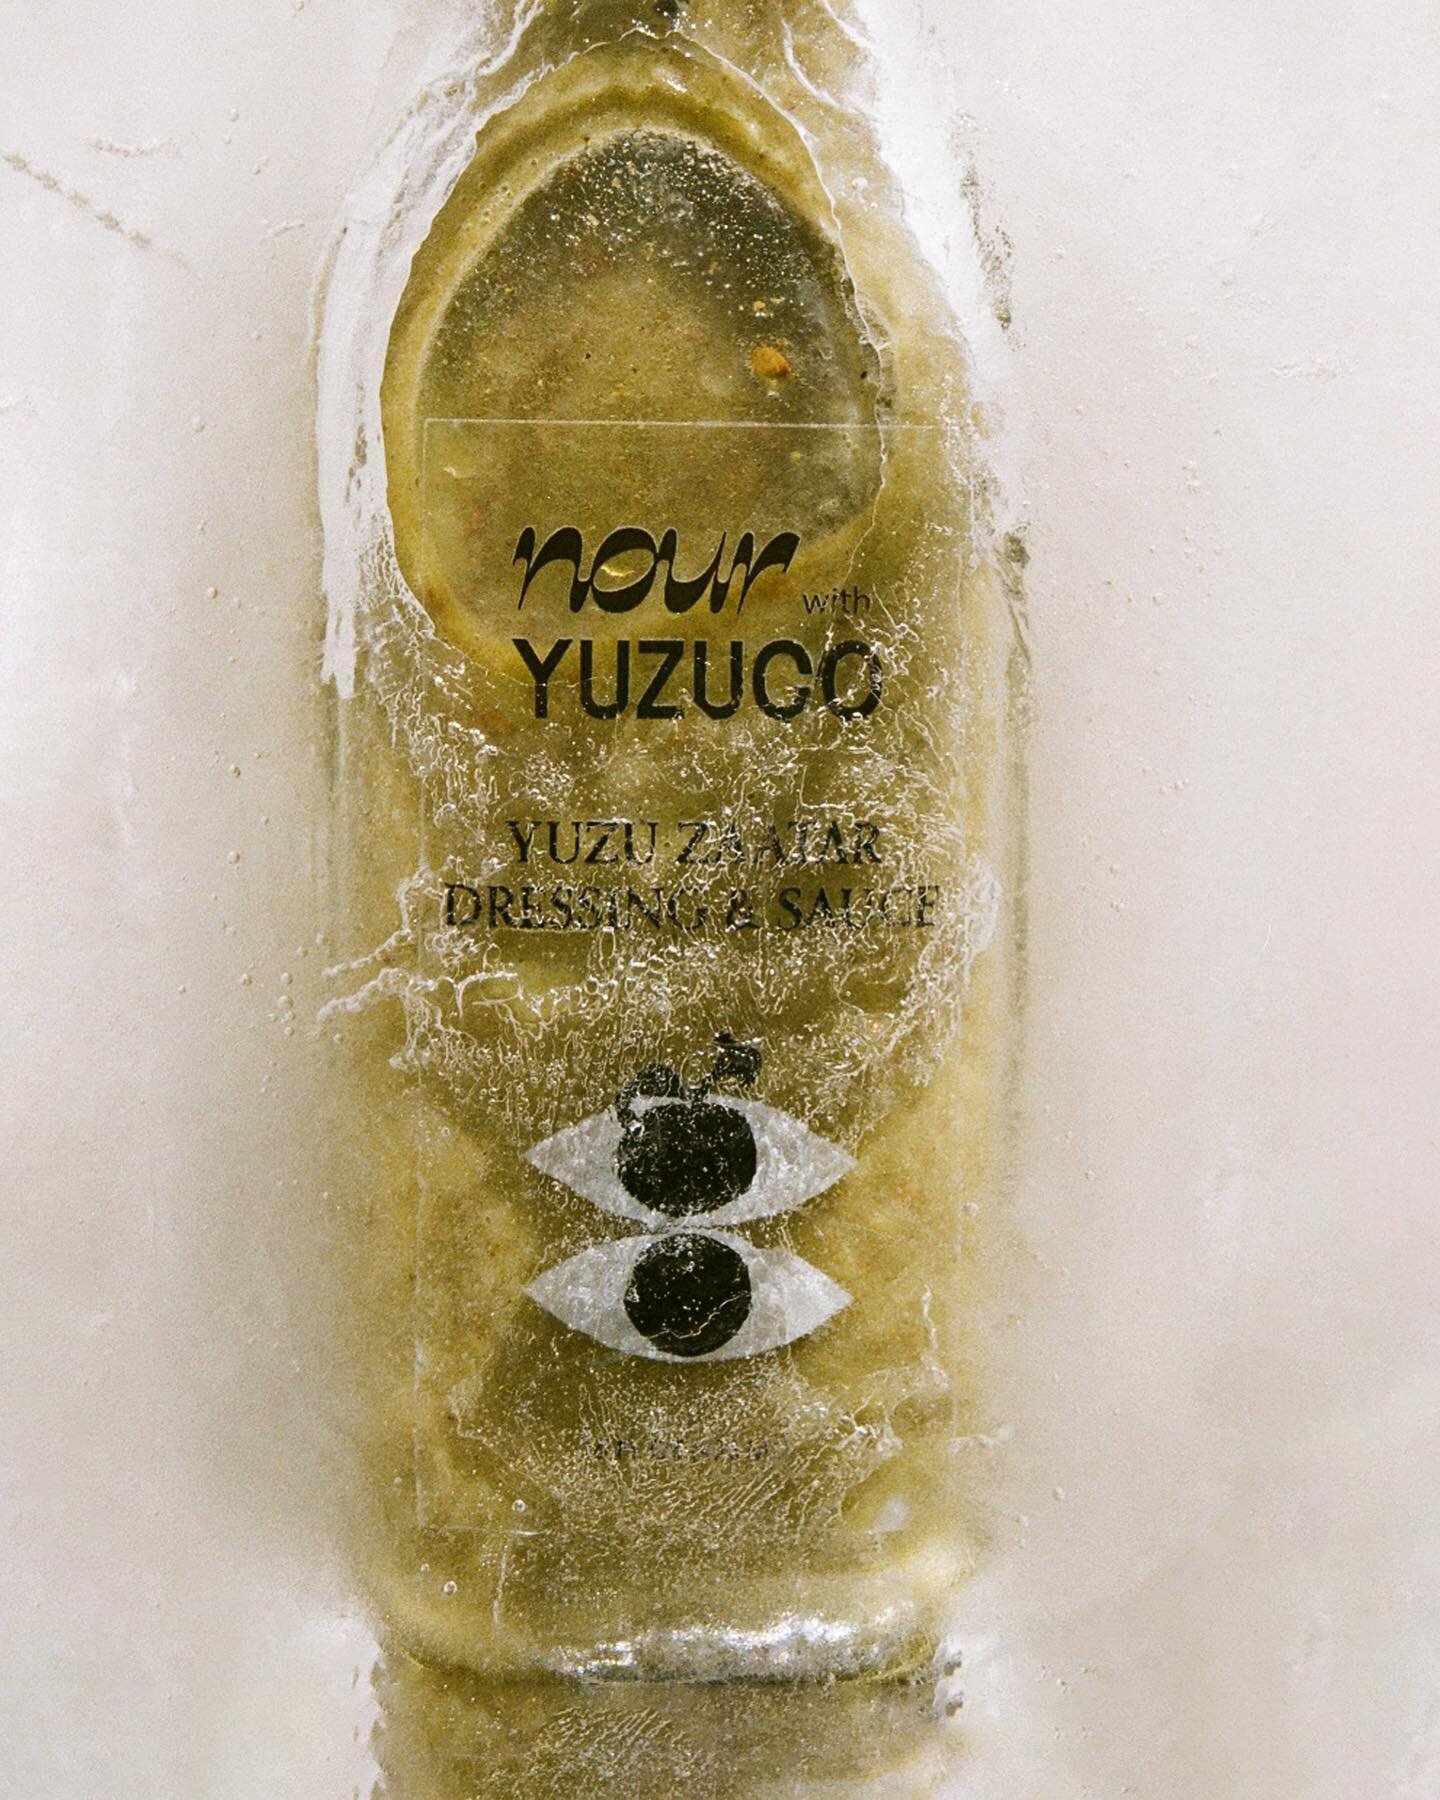 There&rsquo;s a new citrus in town and we think you&rsquo;re going to like it&hellip;👀 @theyuzuco

Shot by @maddypease